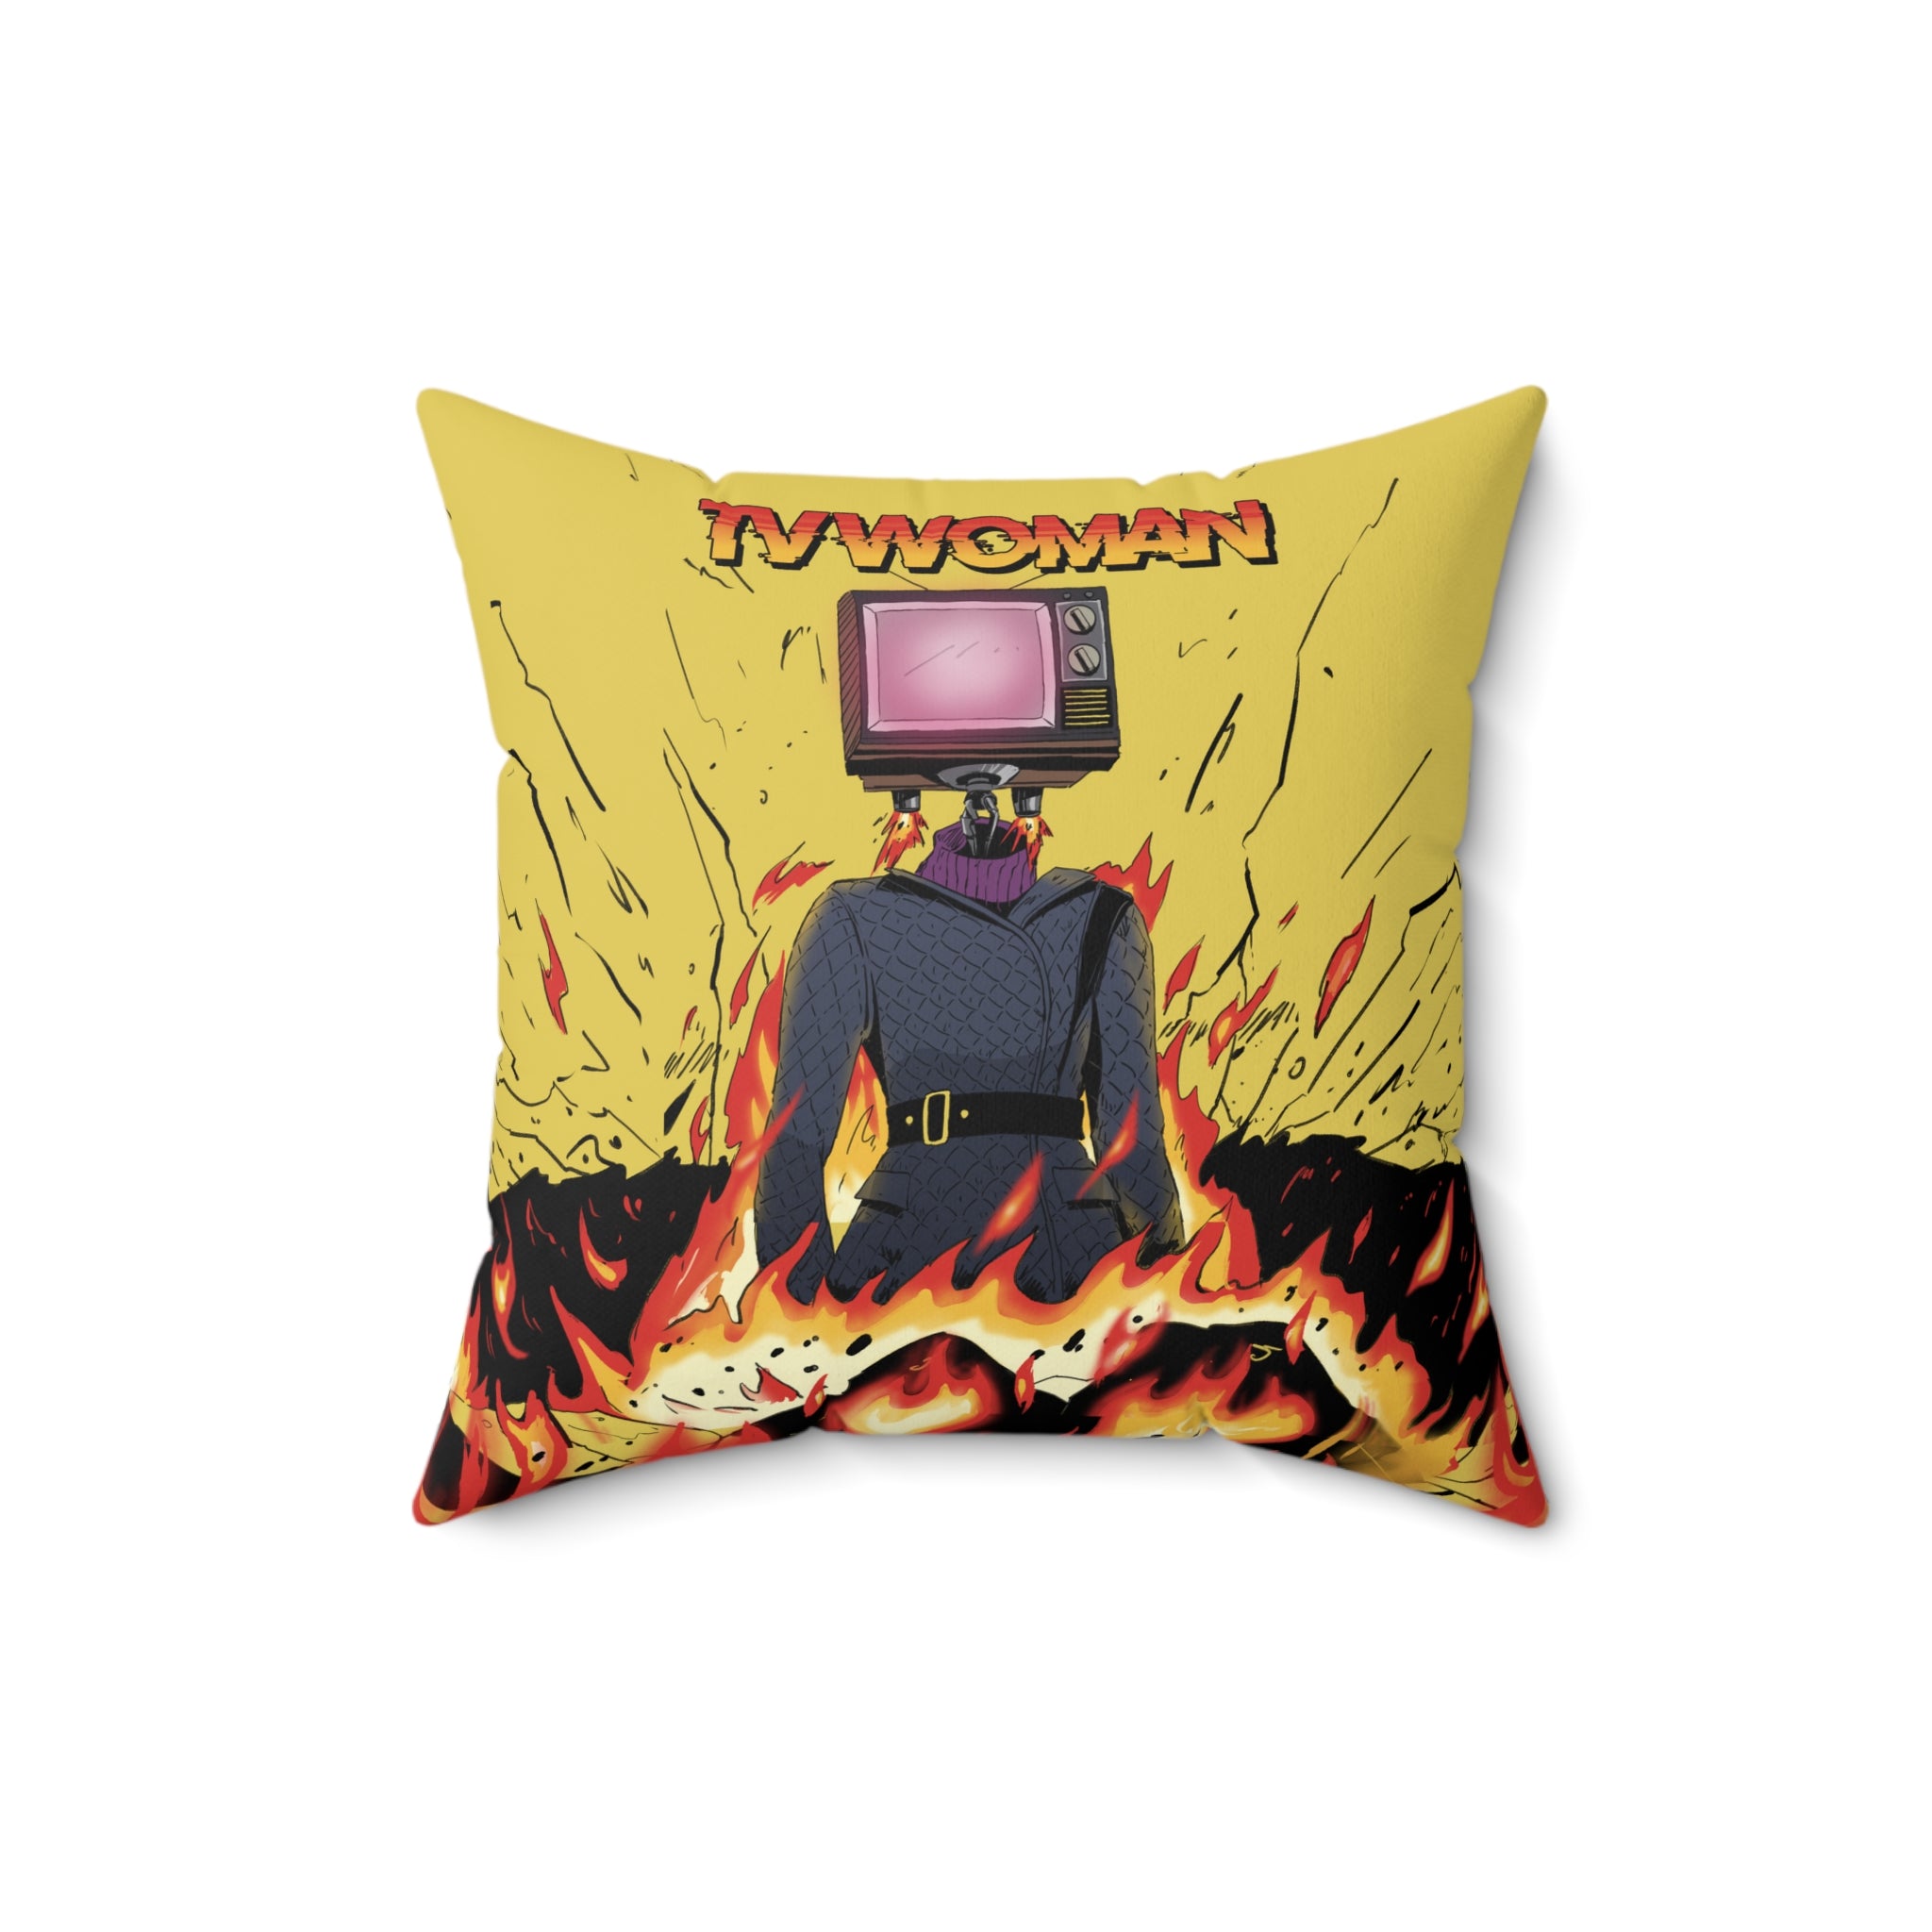 Square pillow with comic-style TV Woman design on both sides.